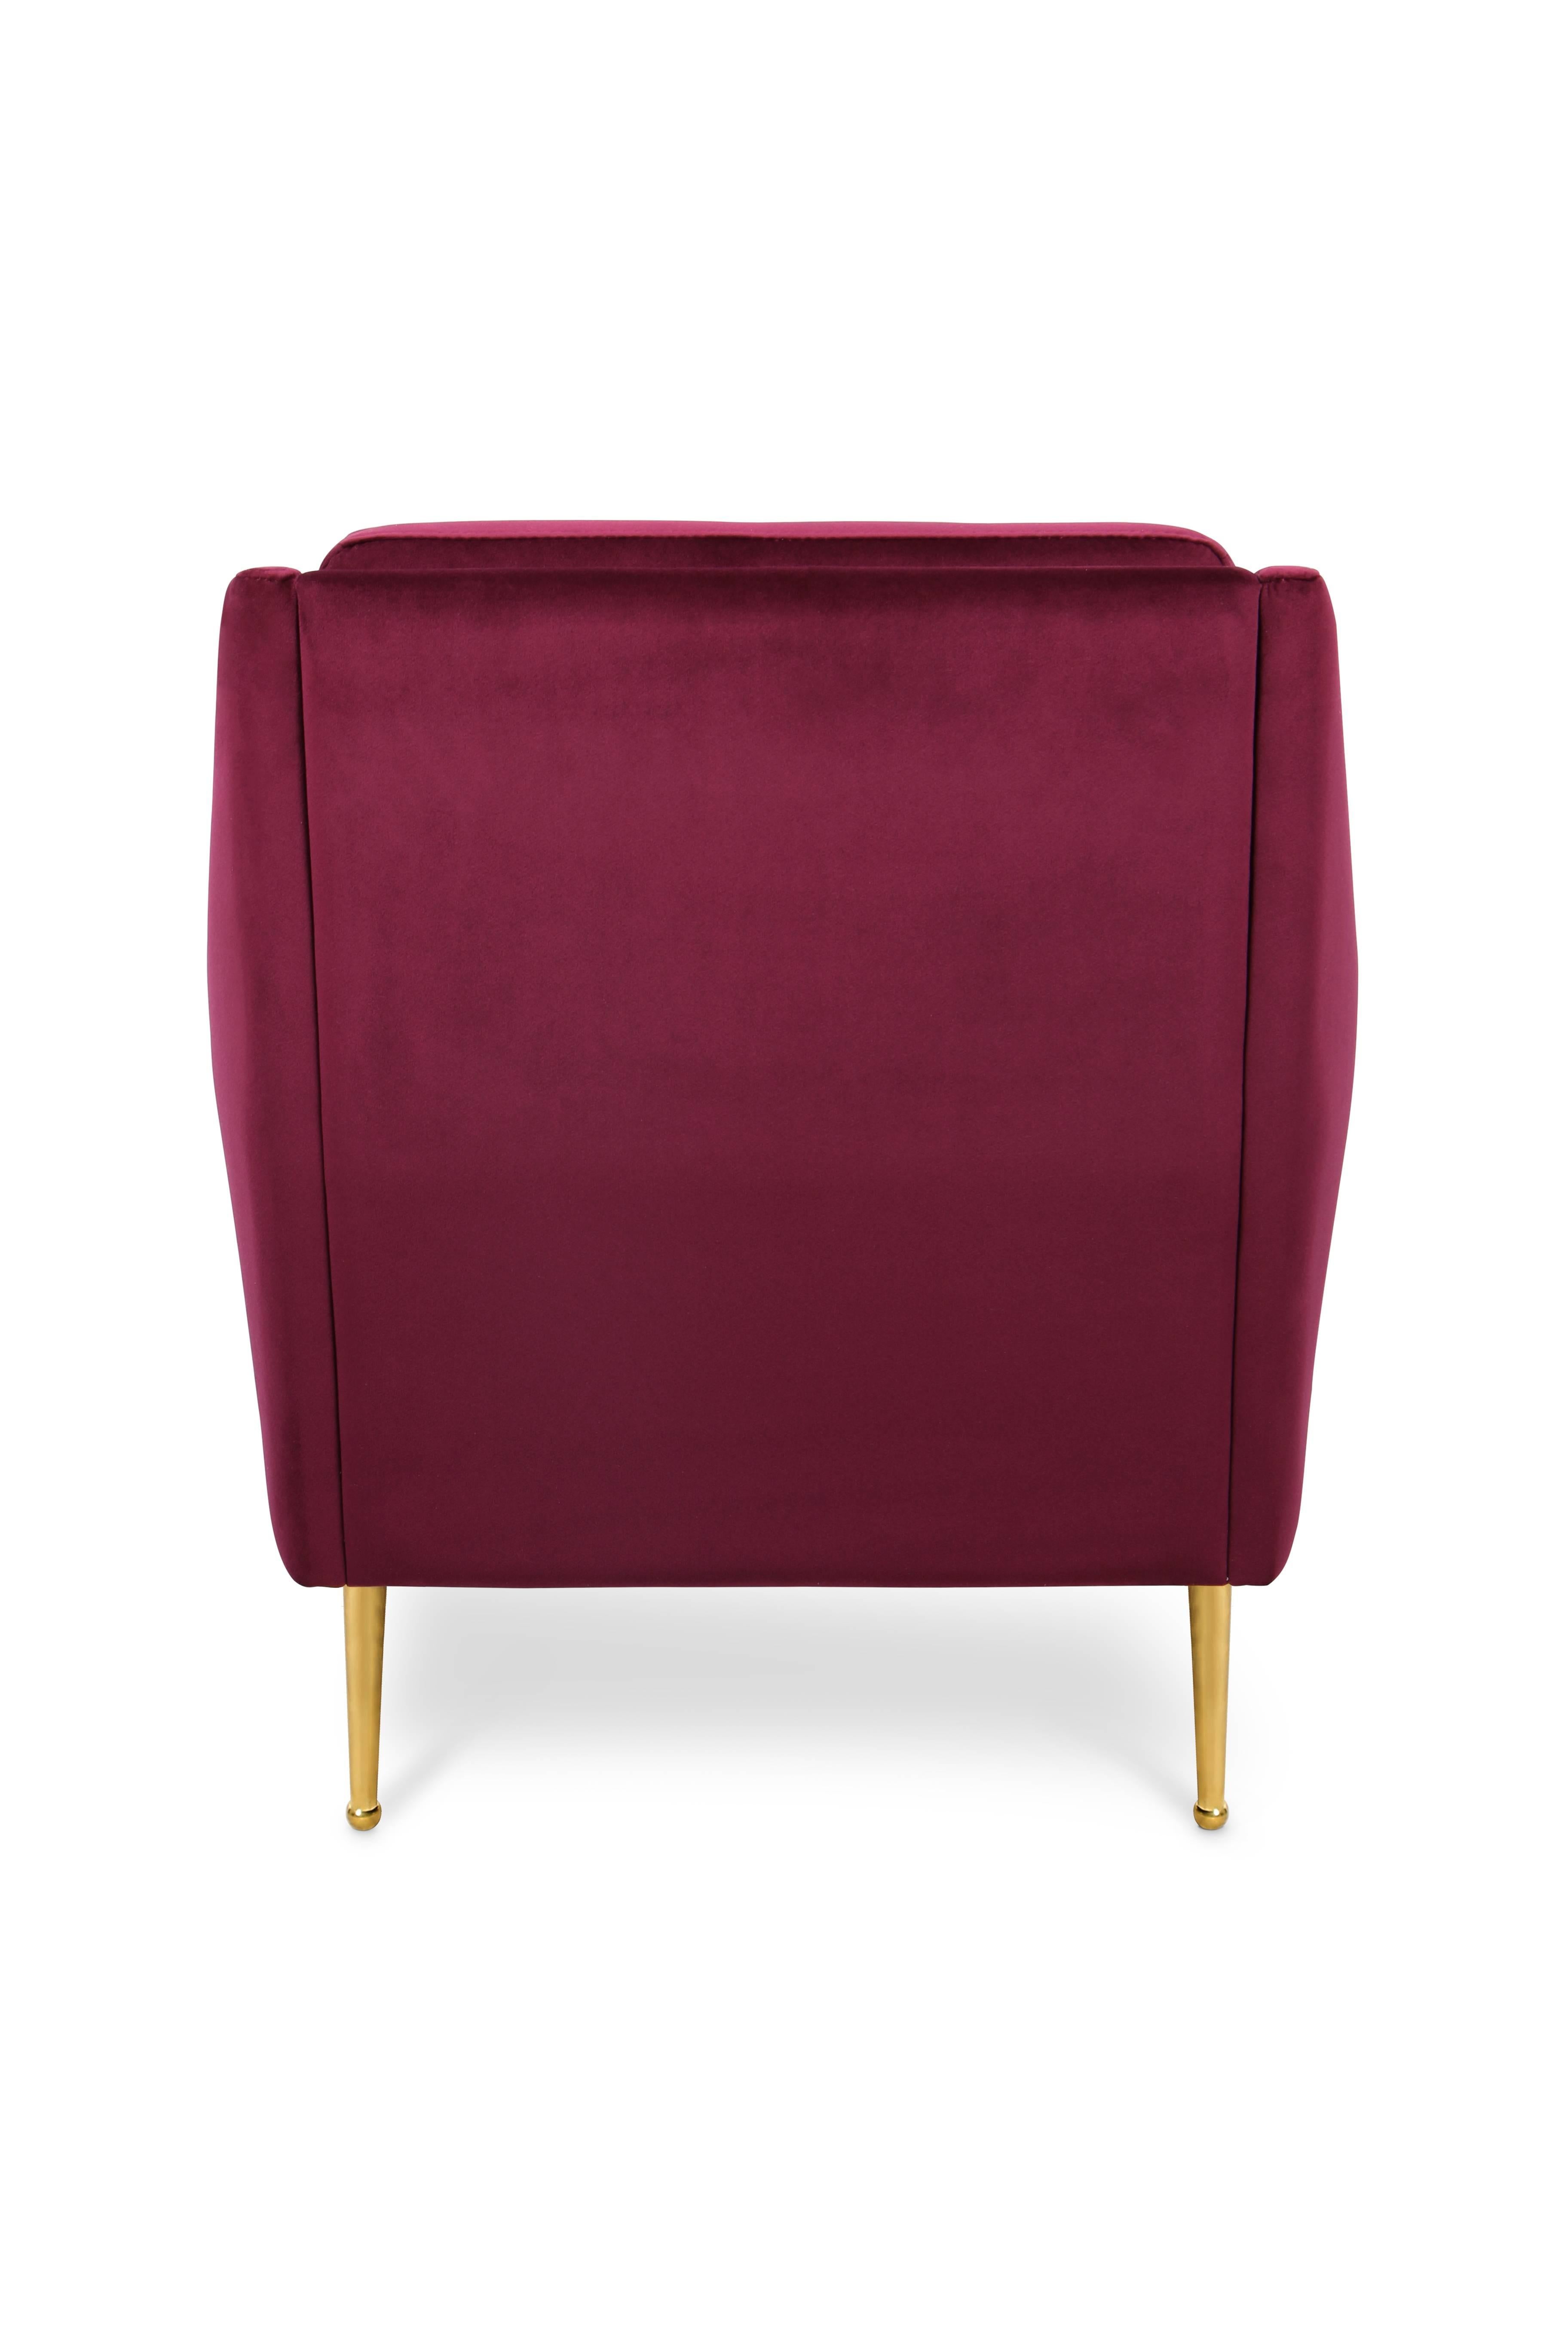 European Mid-Century Modern Inspired Velvet and Brass Armchair In Excellent Condition For Sale In Sydney, NSW